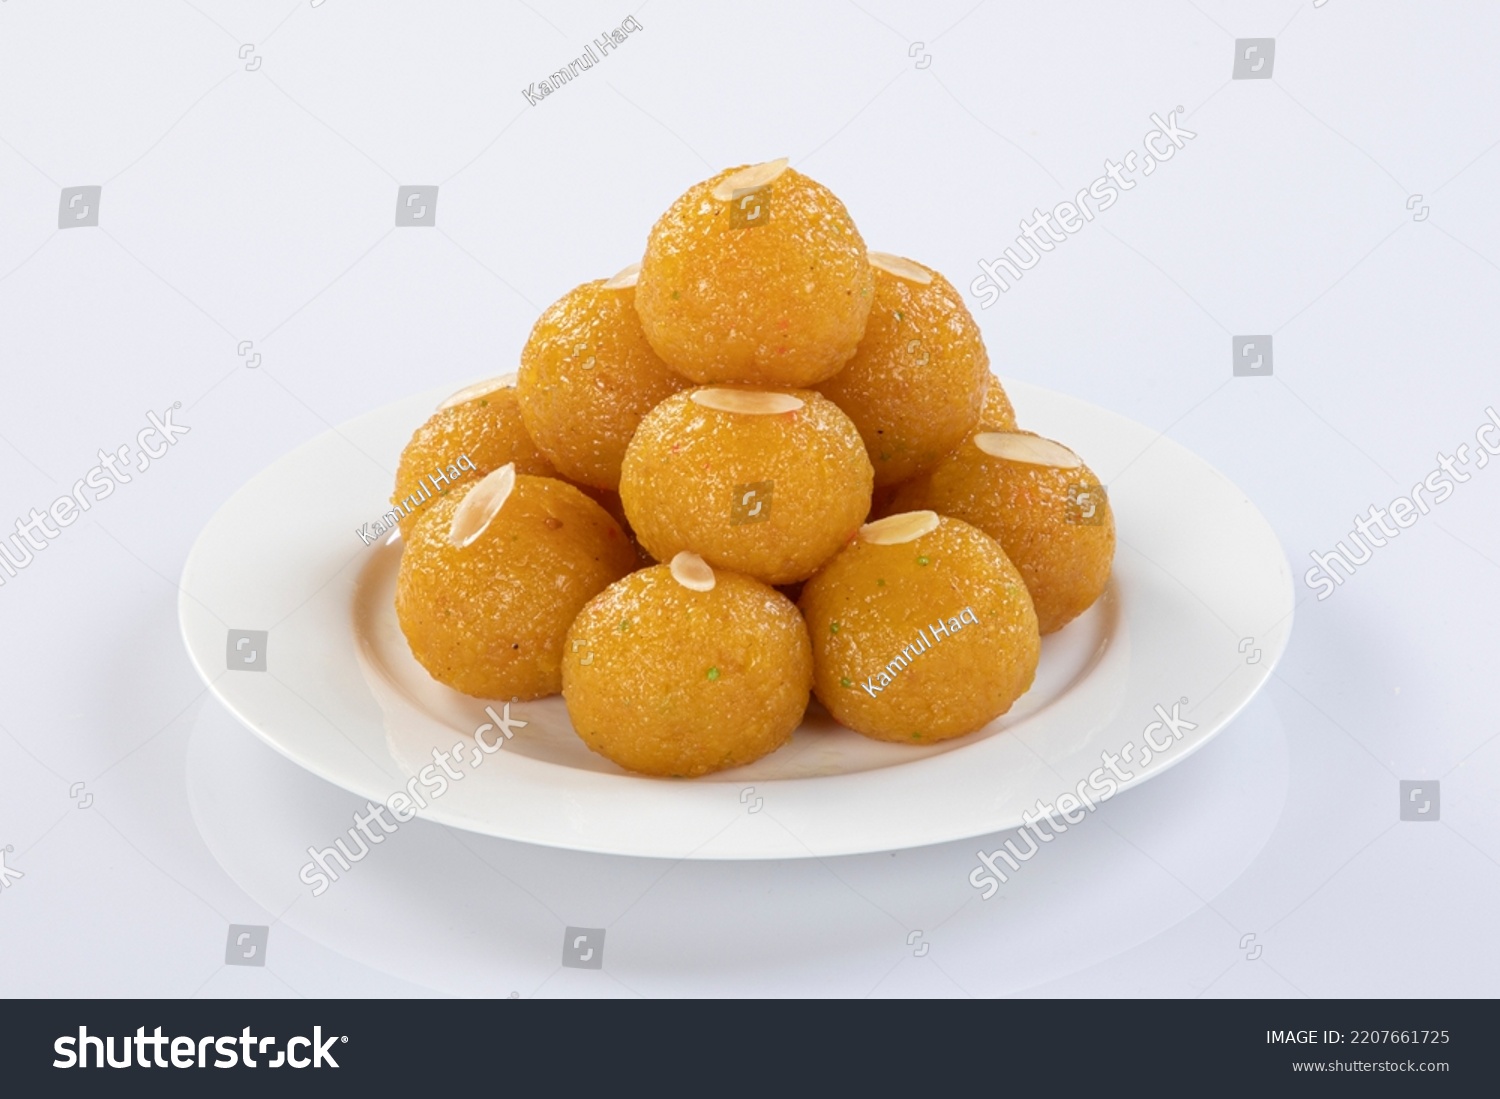 Indian Sweet Motichoor laddoo Also Know as Bundi Laddu or Motichur Laddoo Are Made of Very Small Gram Flour Balls or Boondis Which Are Deep Fried. Isolated On white background. #2207661725